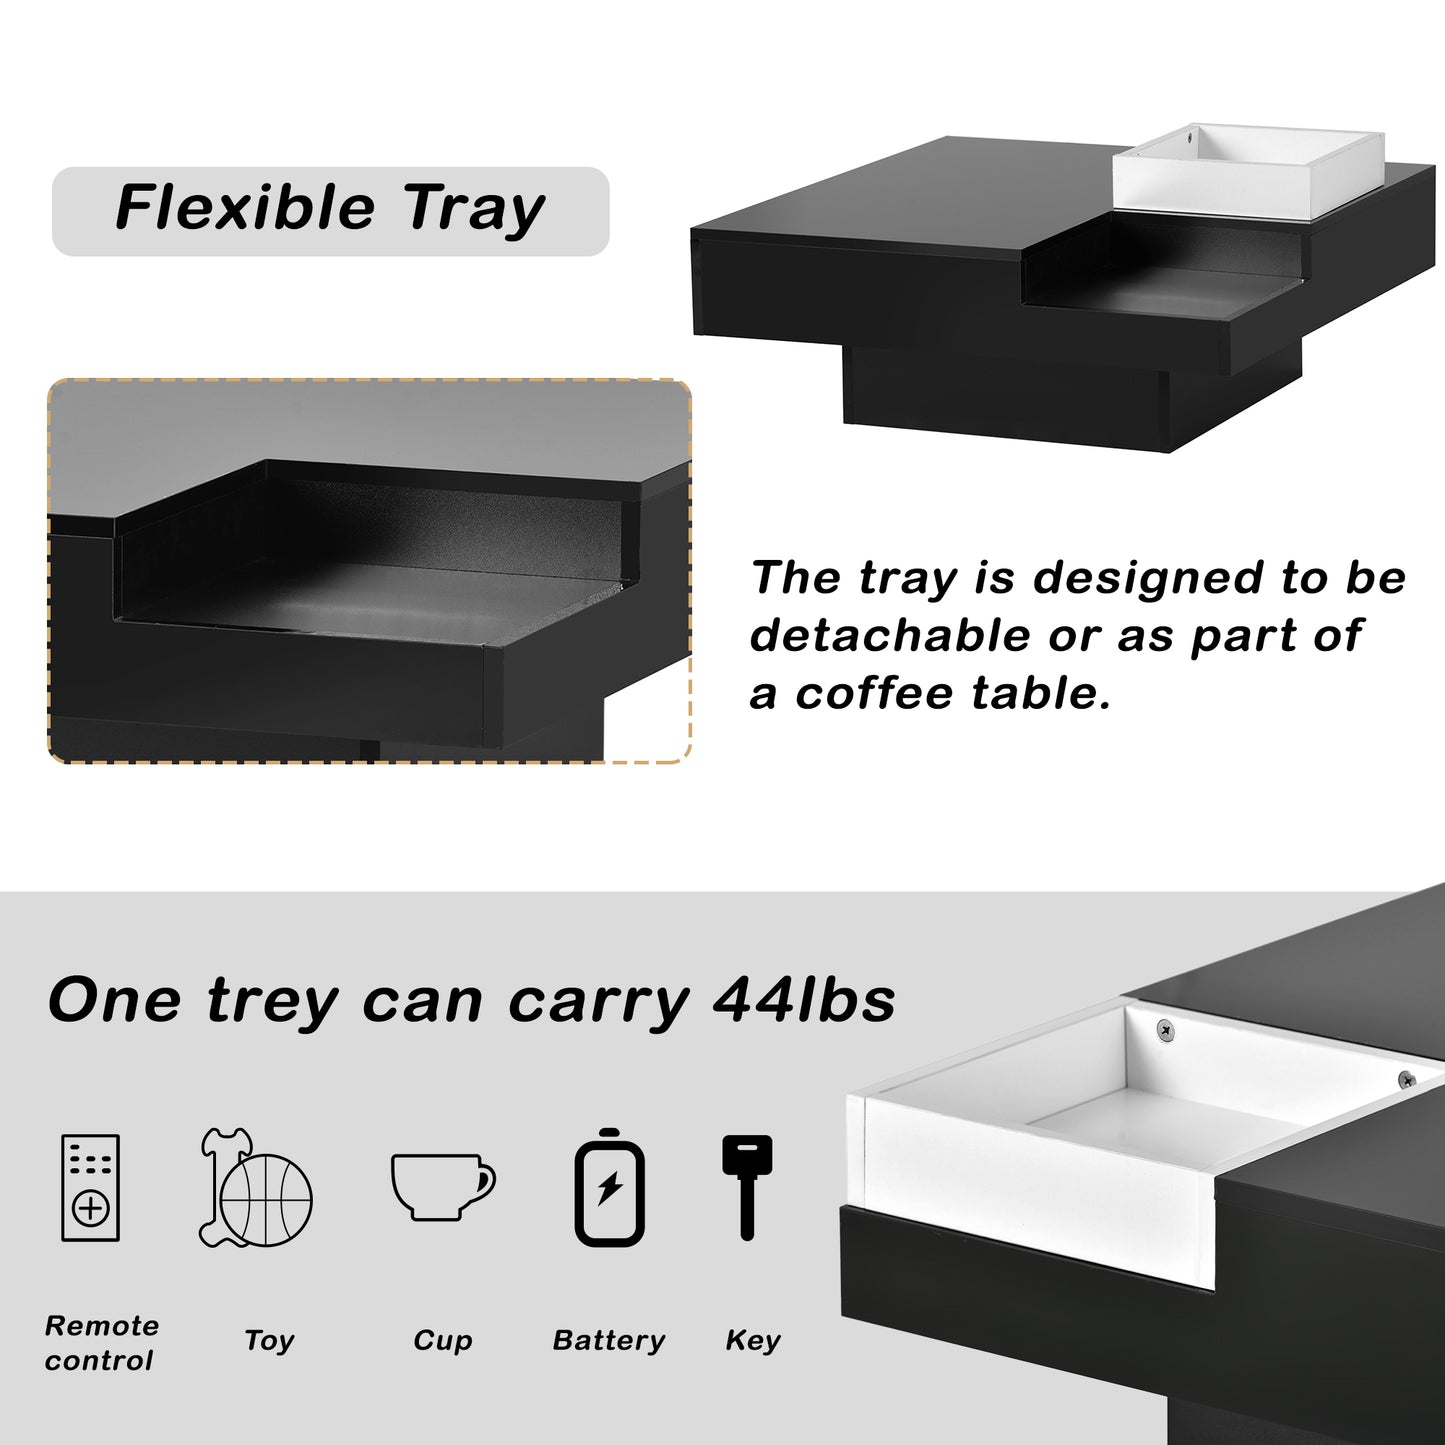 Square Coffee Table with Detachable Tray and Plug-in 16-color LED Strip Lights Remote Control